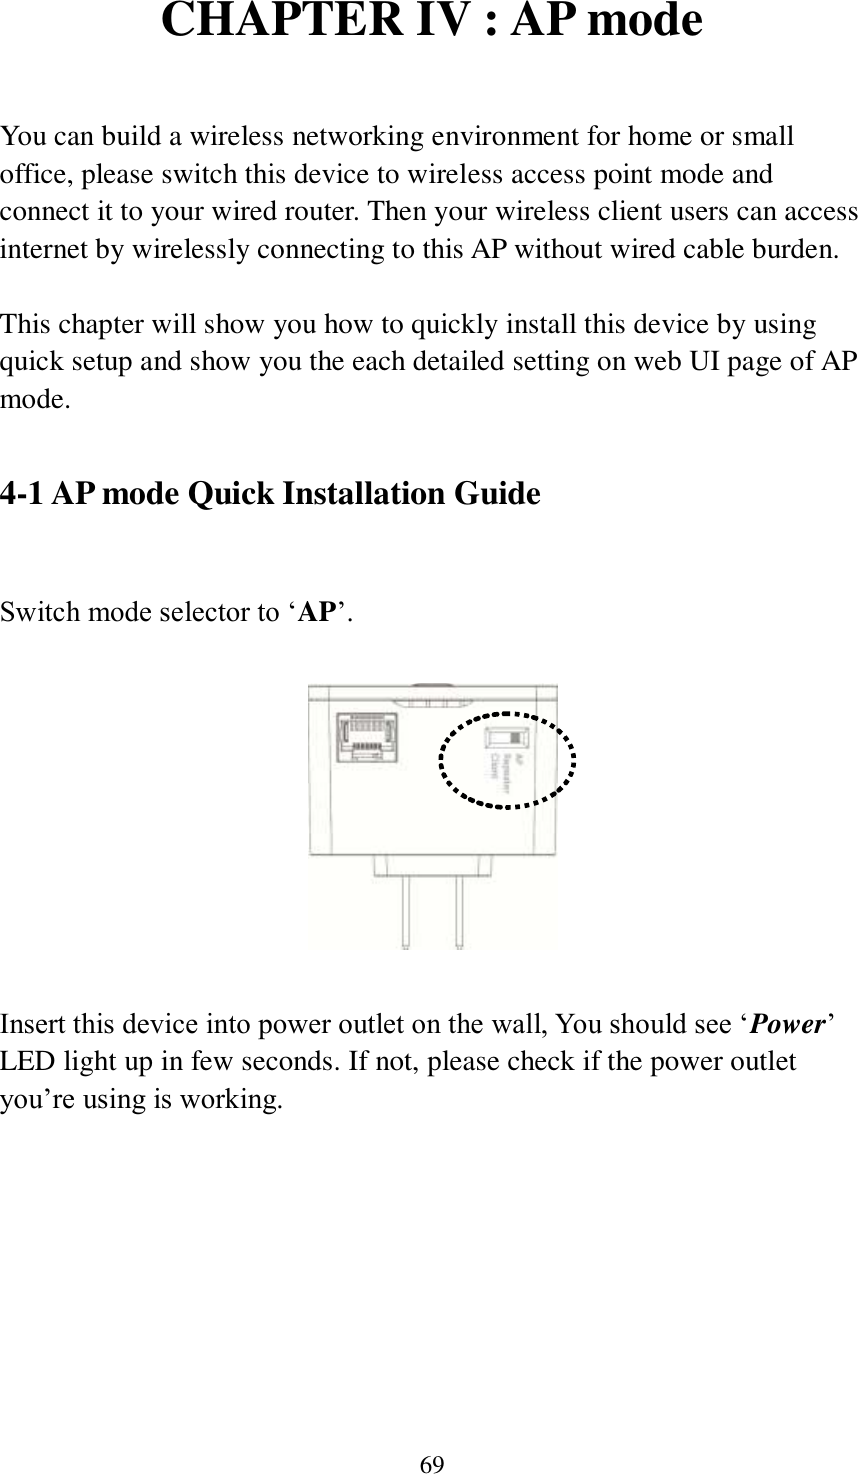 69 CHAPTER IV : AP mode  You can build a wireless networking environment for home or small office, please switch this device to wireless access point mode and connect it to your wired router. Then your wireless client users can access internet by wirelessly connecting to this AP without wired cable burden.    This chapter will show you how to quickly install this device by using quick setup and show you the each detailed setting on web UI page of AP mode.    4-1 AP mode Quick Installation Guide  Switch mode selector to ‘AP’.    Insert this device into power outlet on the wall, You should see ‘Power’ LED light up in few seconds. If not, please check if the power outlet you’re using is working.  